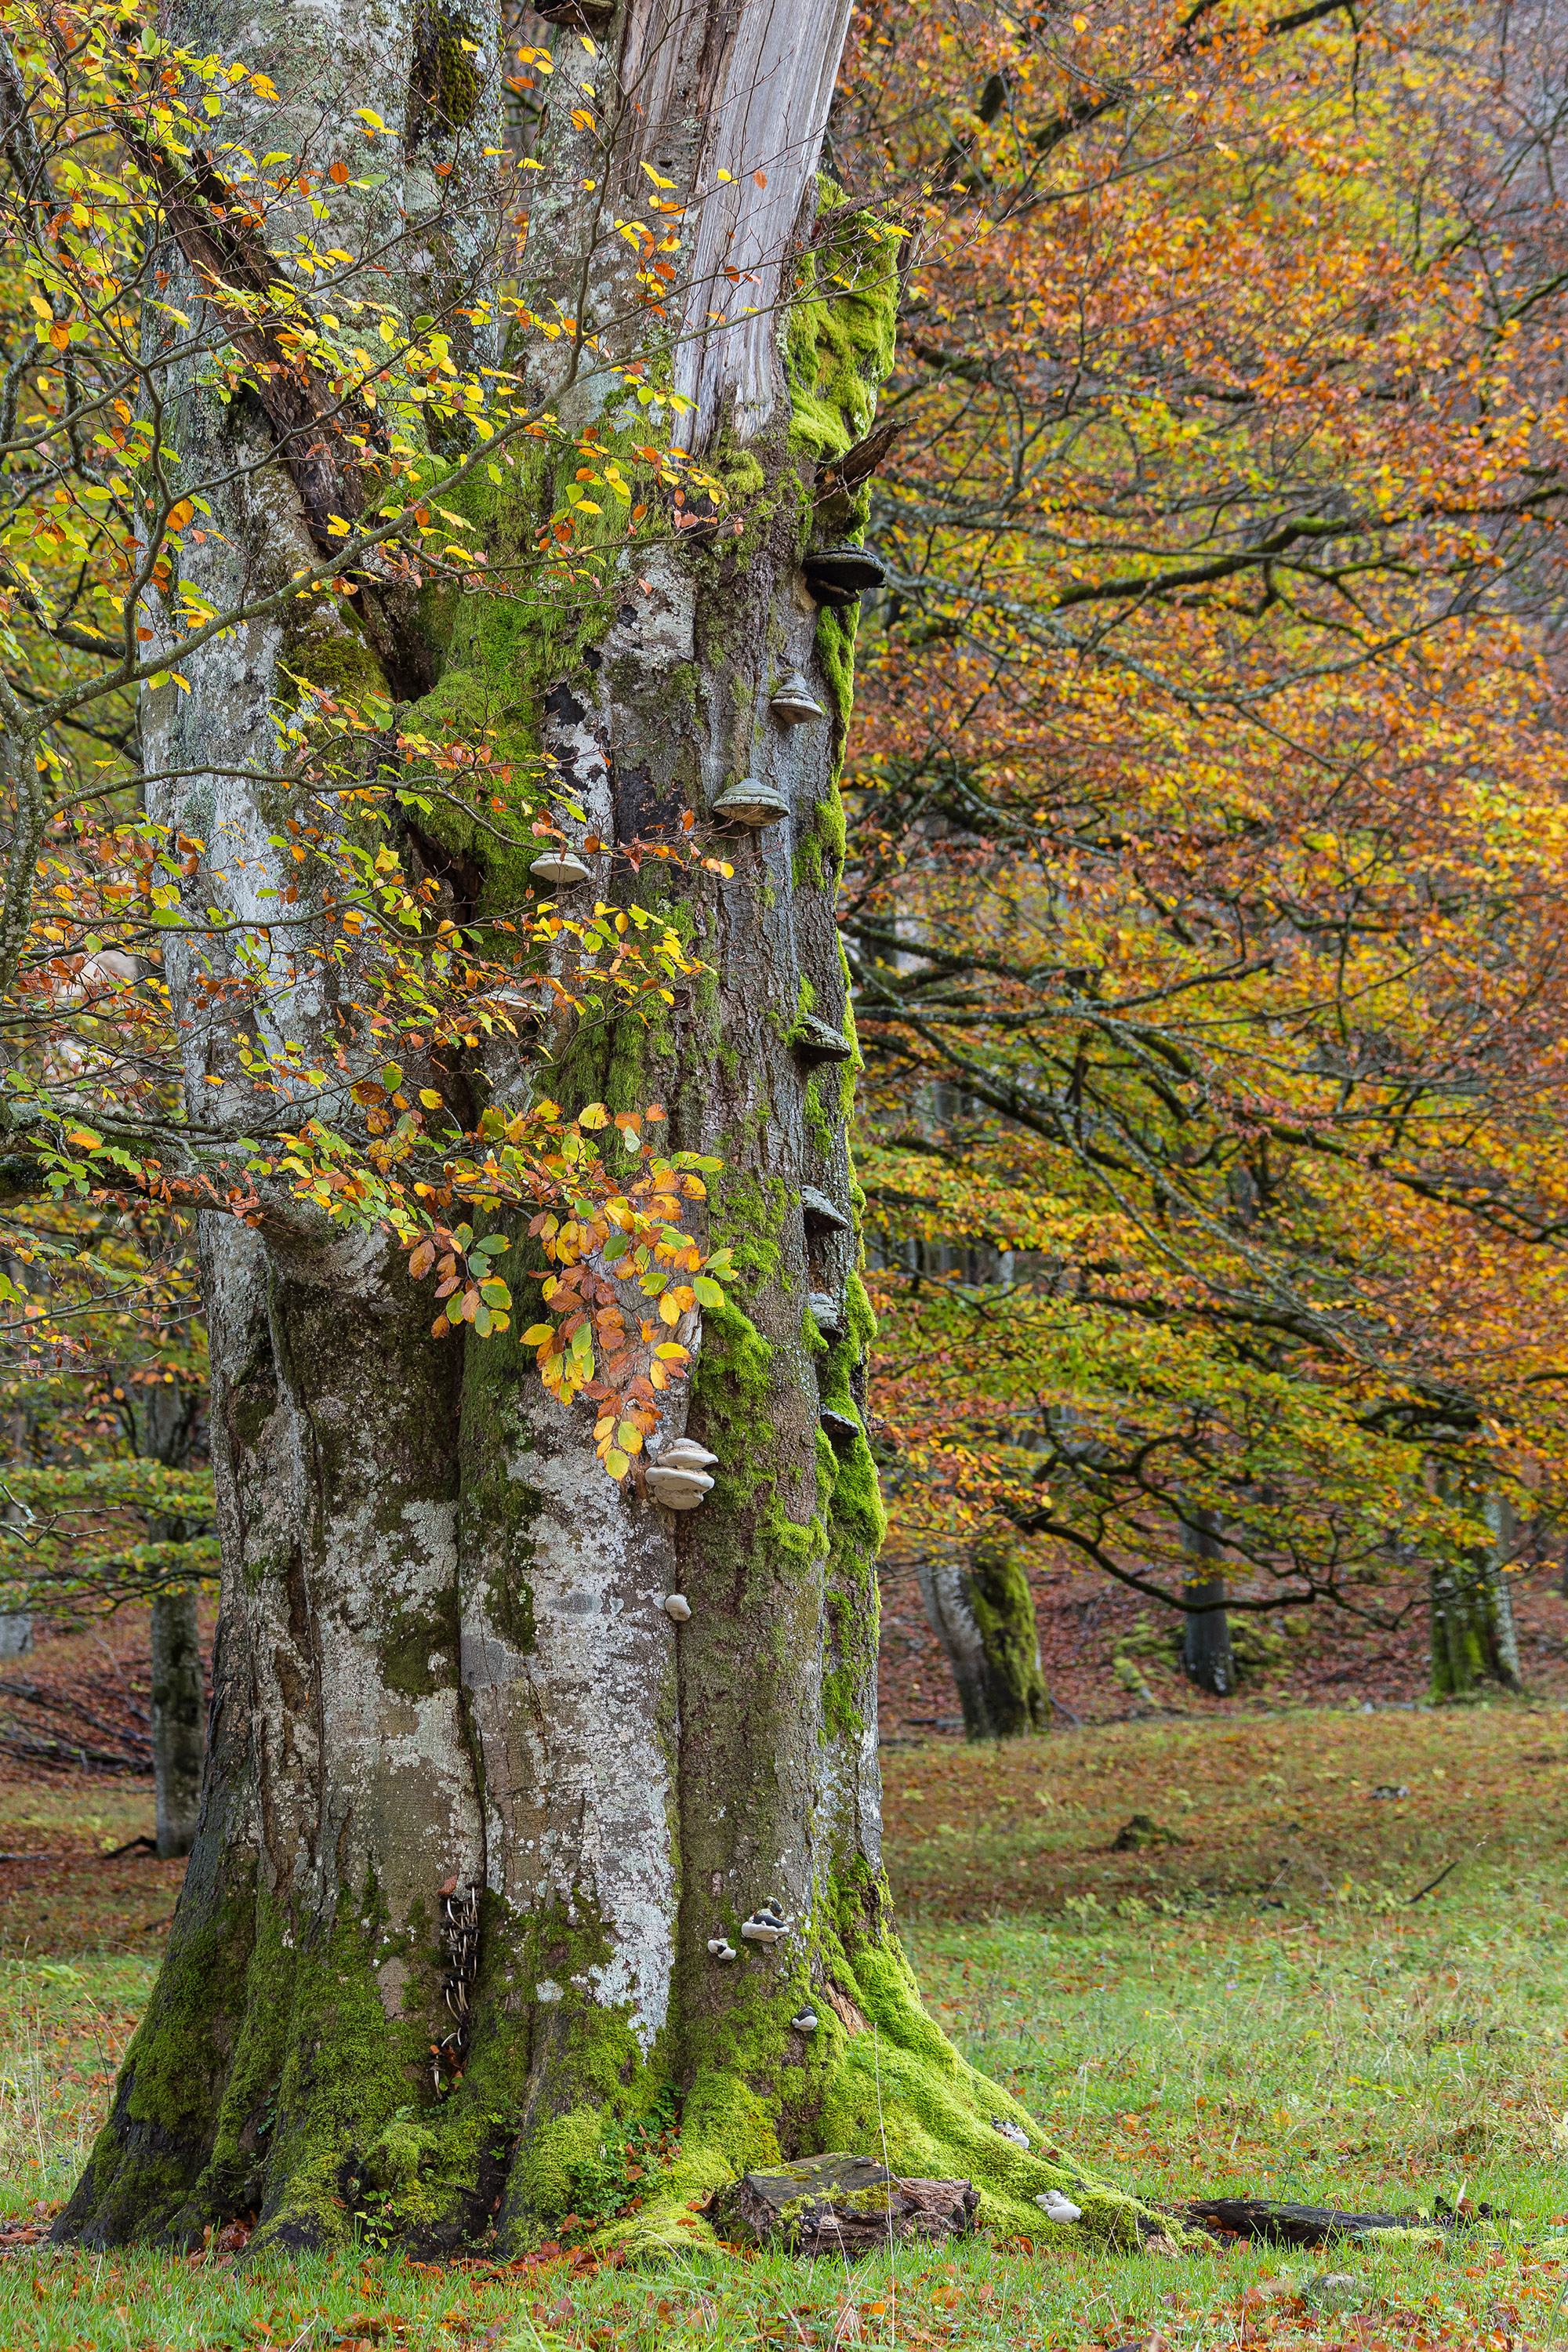 Tree fungi grow from the trunk of a large beech tree in autumnal colors